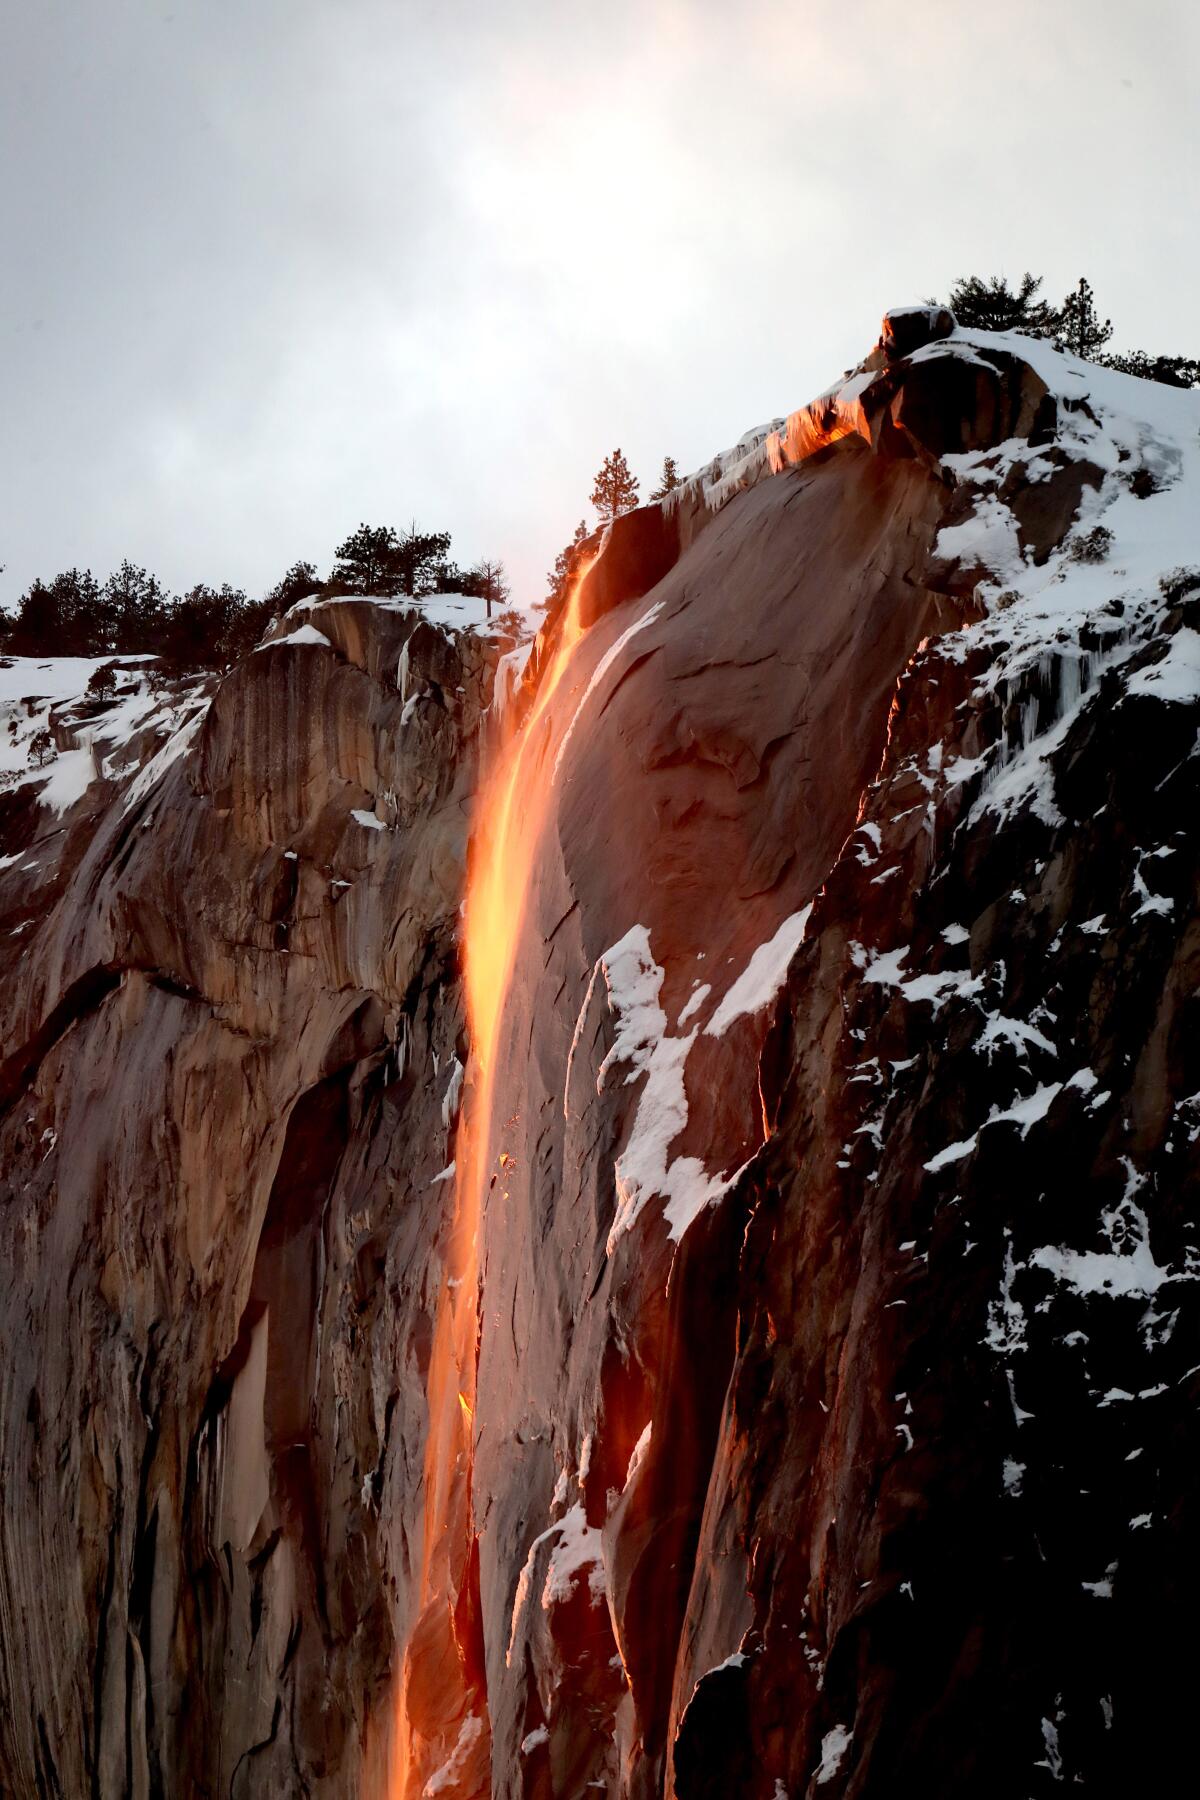 Yosemite's "firefall" at Horsetail Fall in 2019